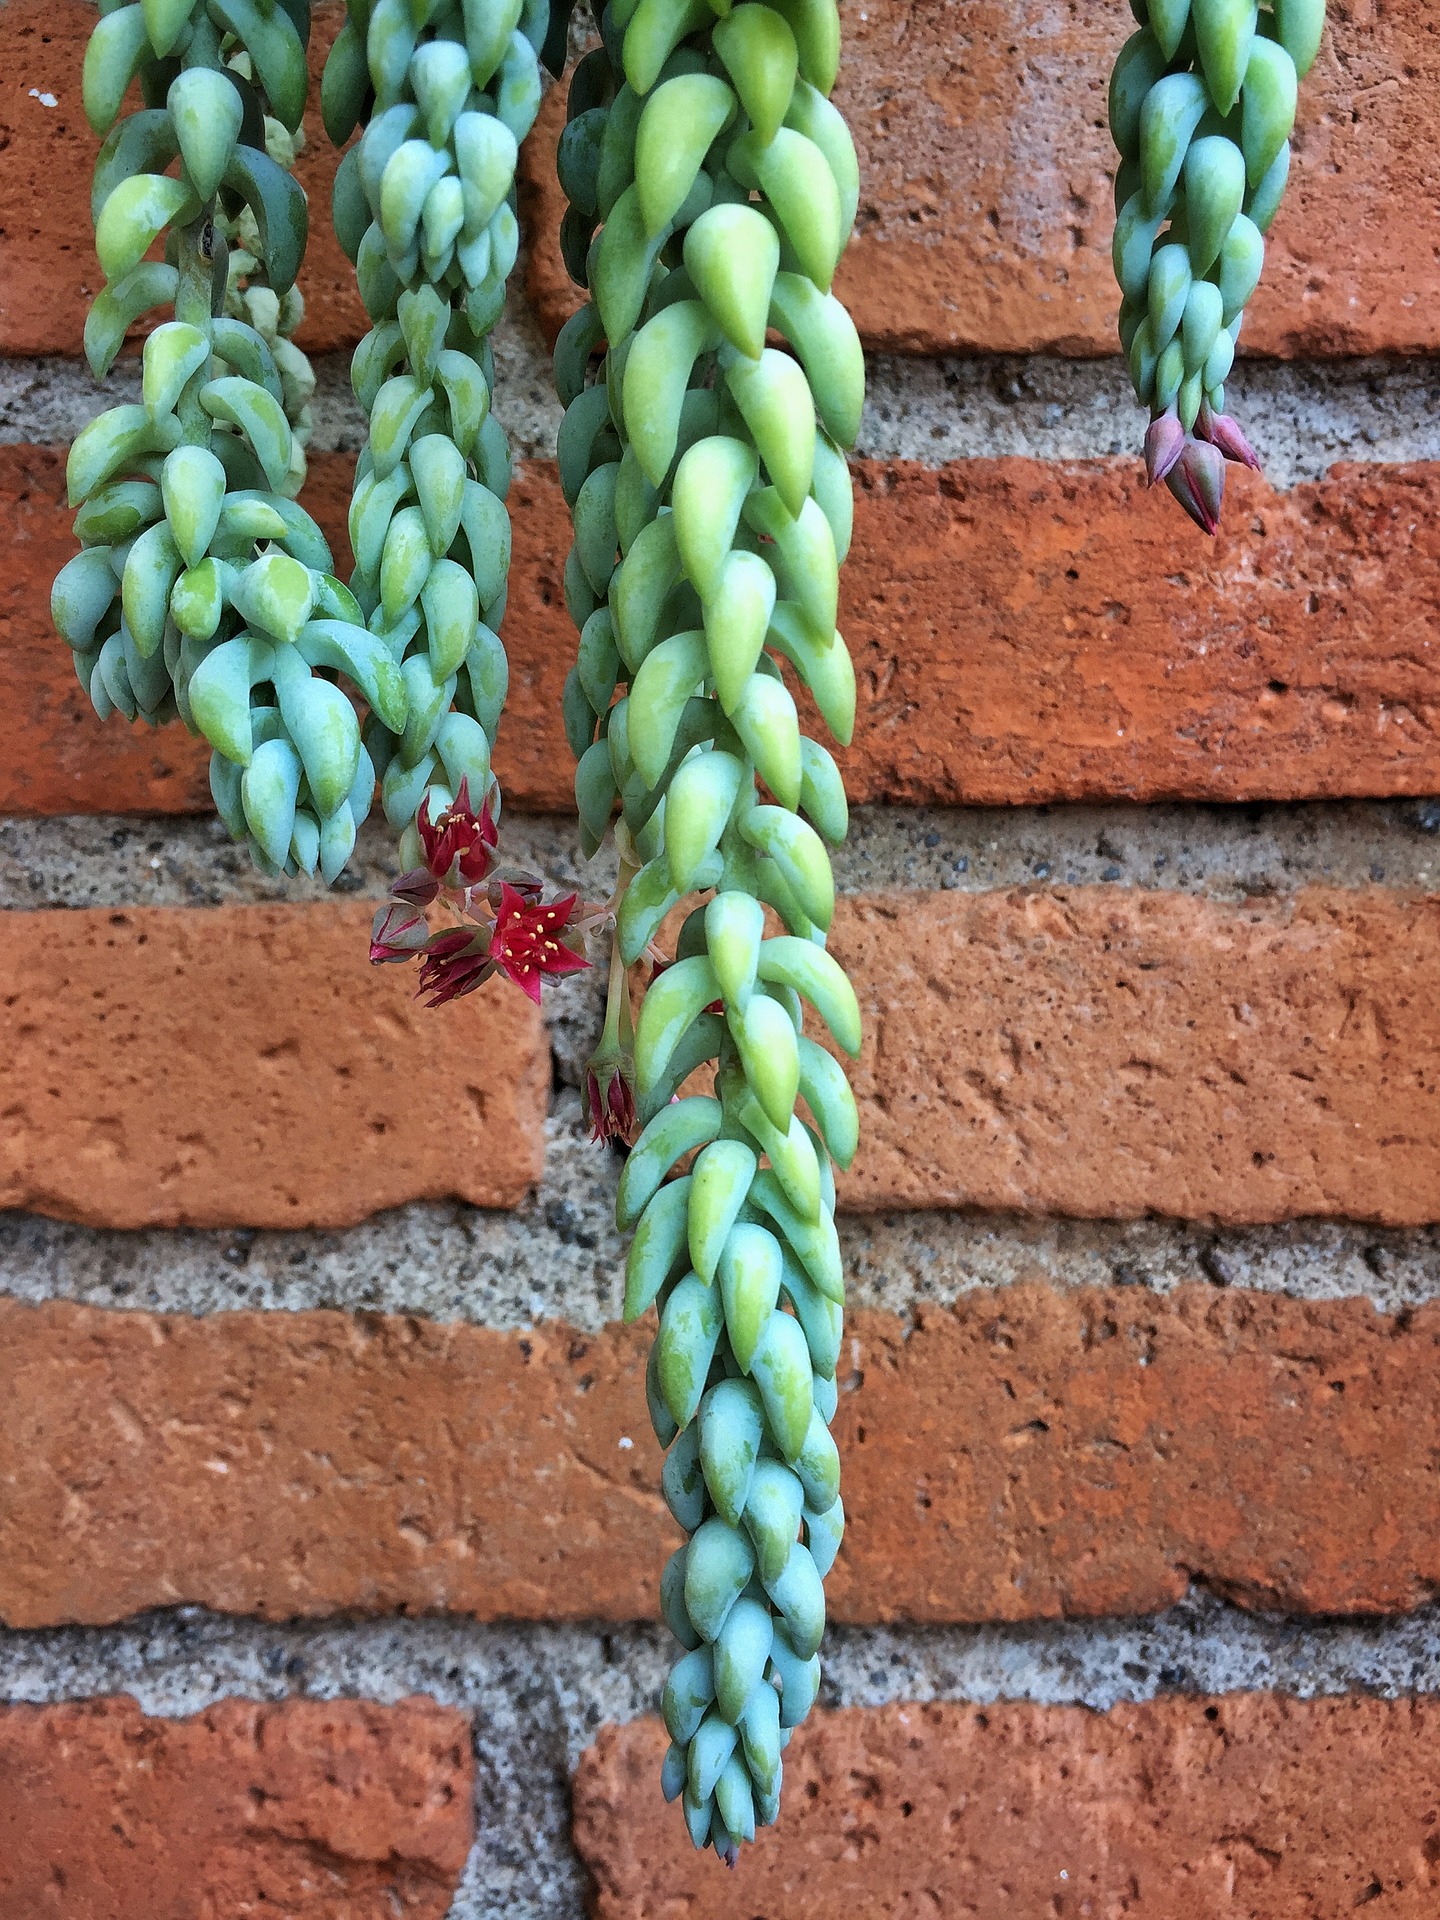 Donkey tail makes a beautiful succulent container without combining it with other succulents.